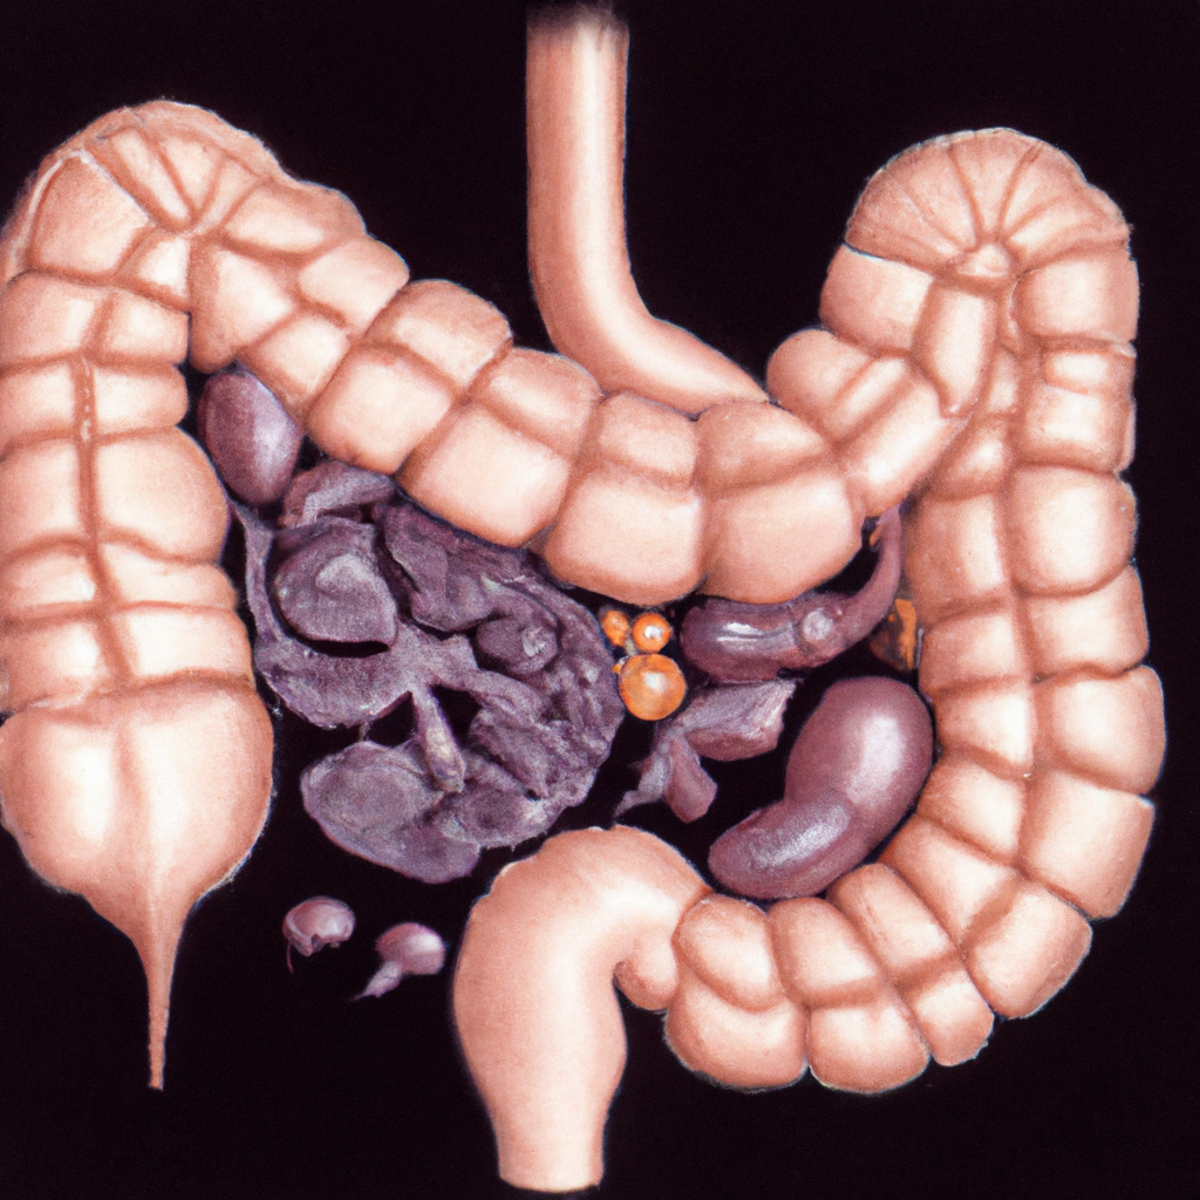 Close-up of enlarged annular pancreas encircling duodenum, highlighting abnormalities and inflammation. Seek medical attention for associated symptoms.